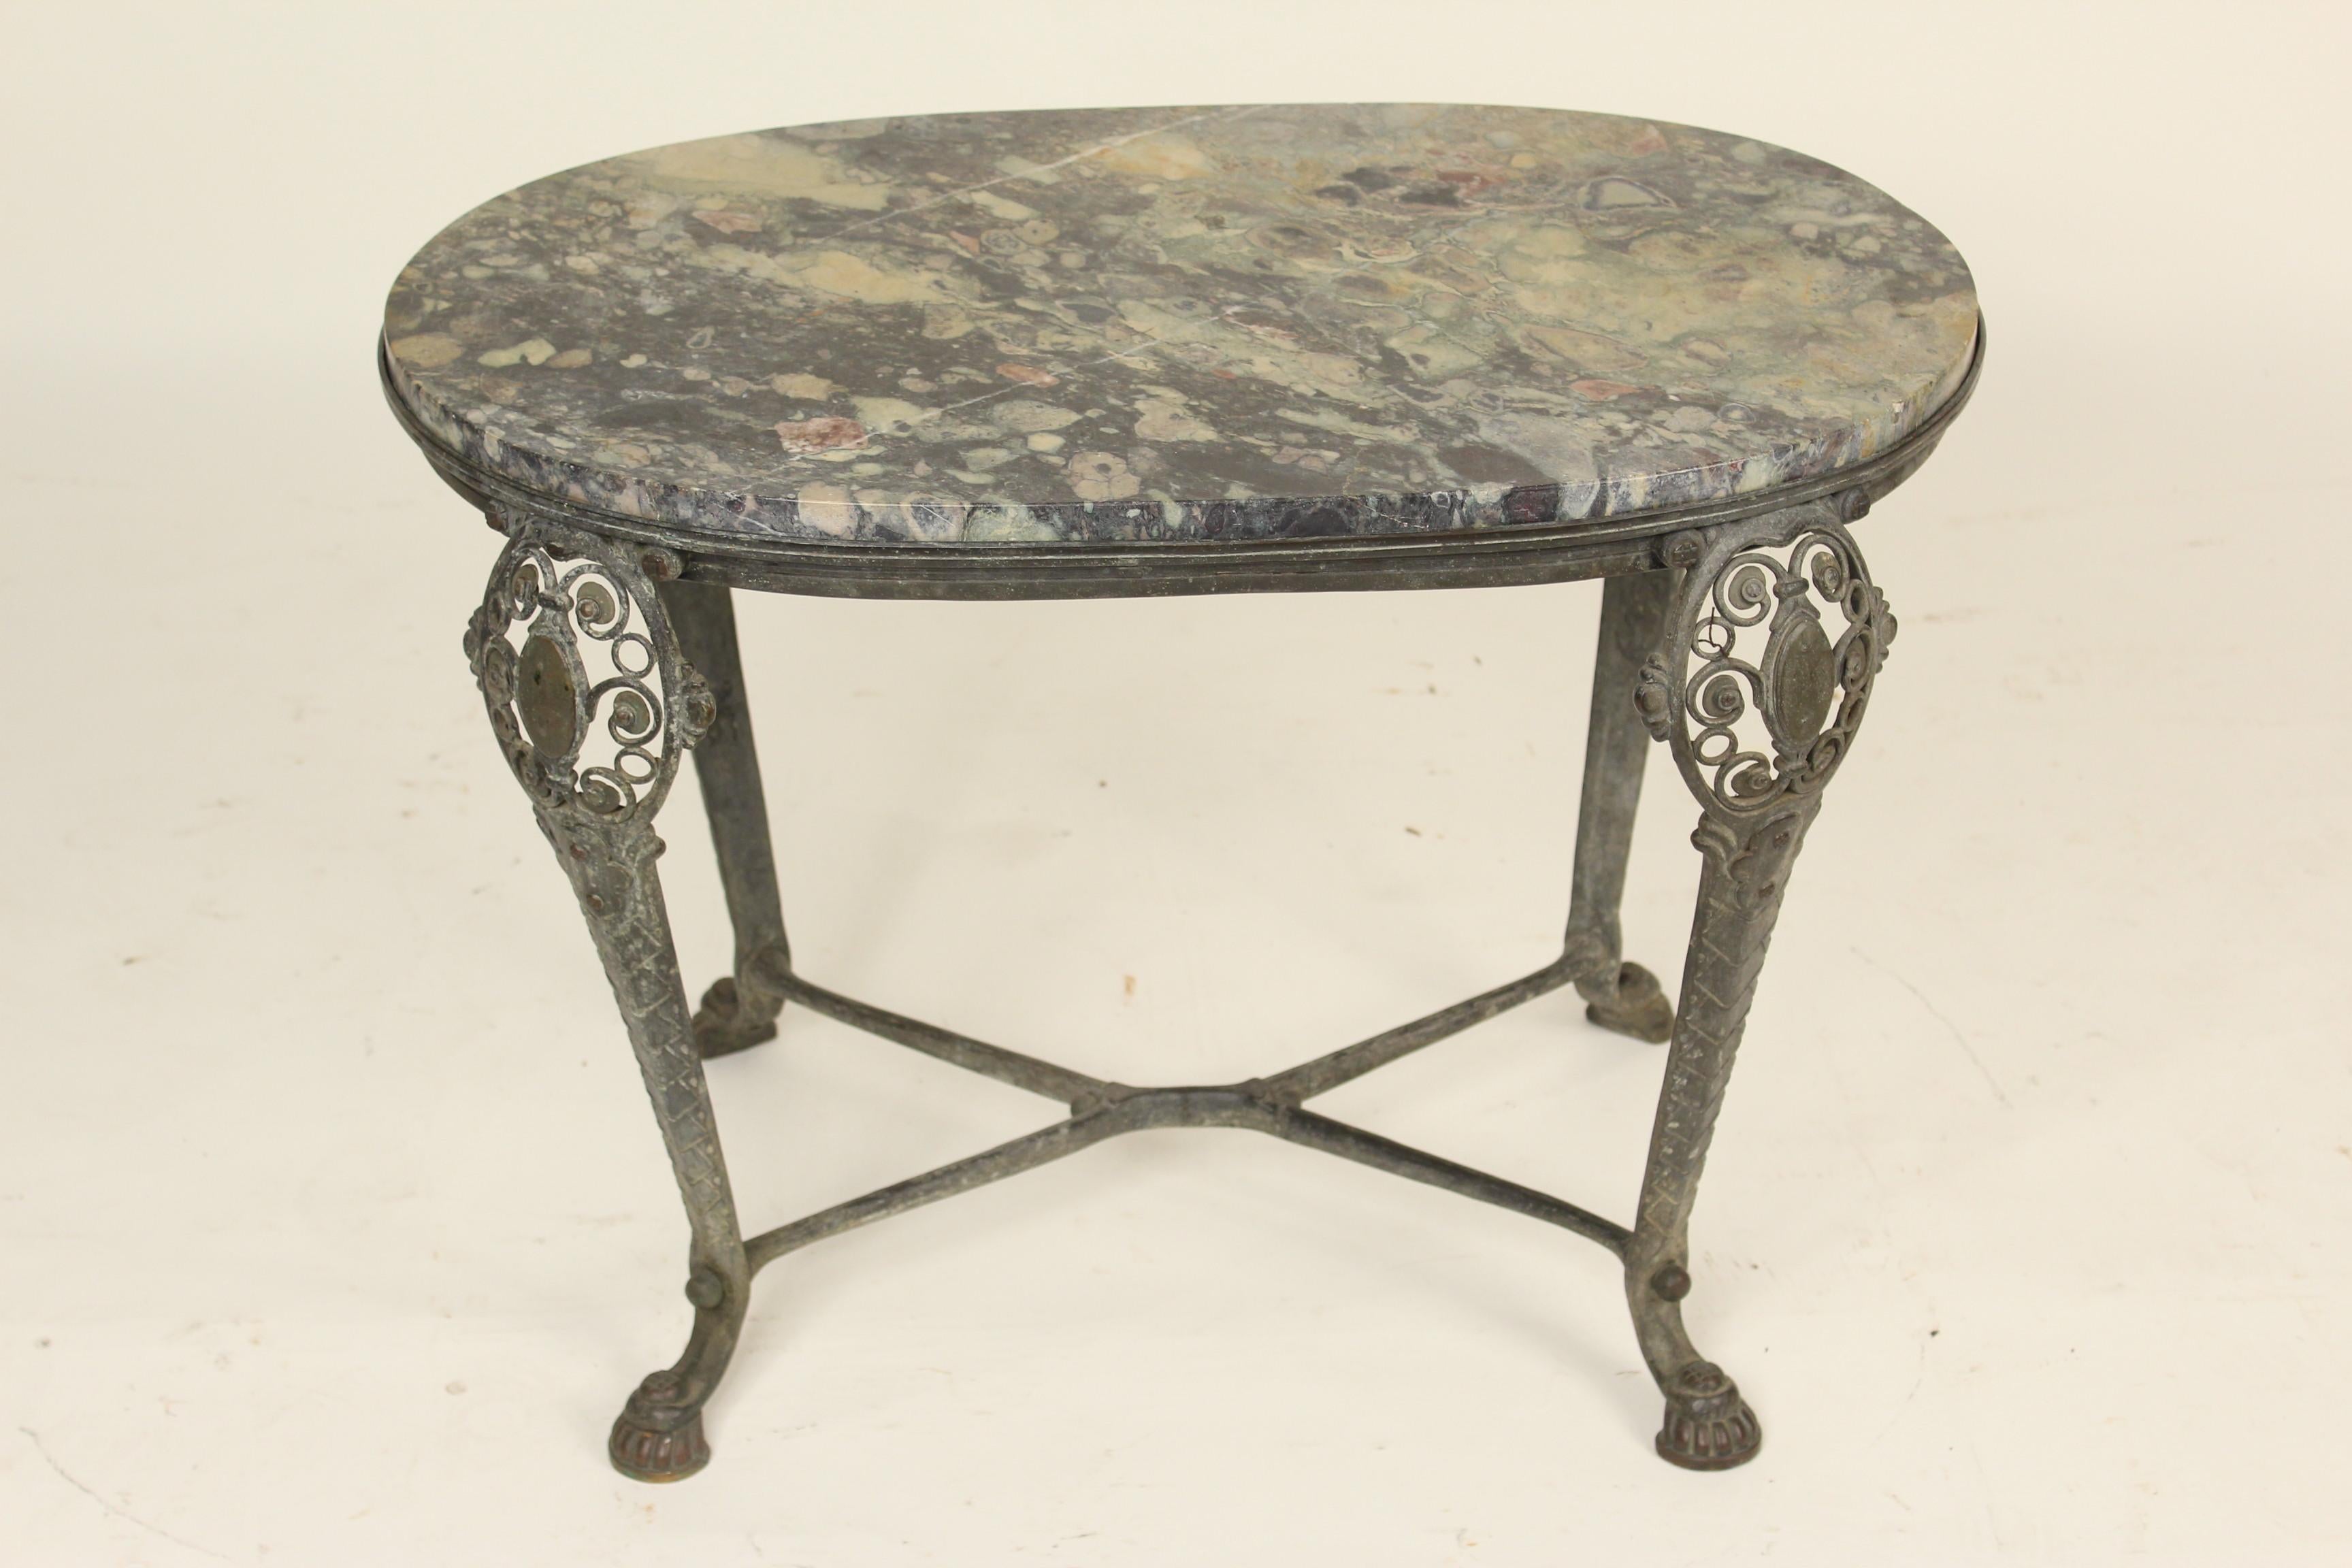 Napoleon III style bronze side table with a marble top circa 1930-1950. This decorative side table could be used either outdoors or indoors.